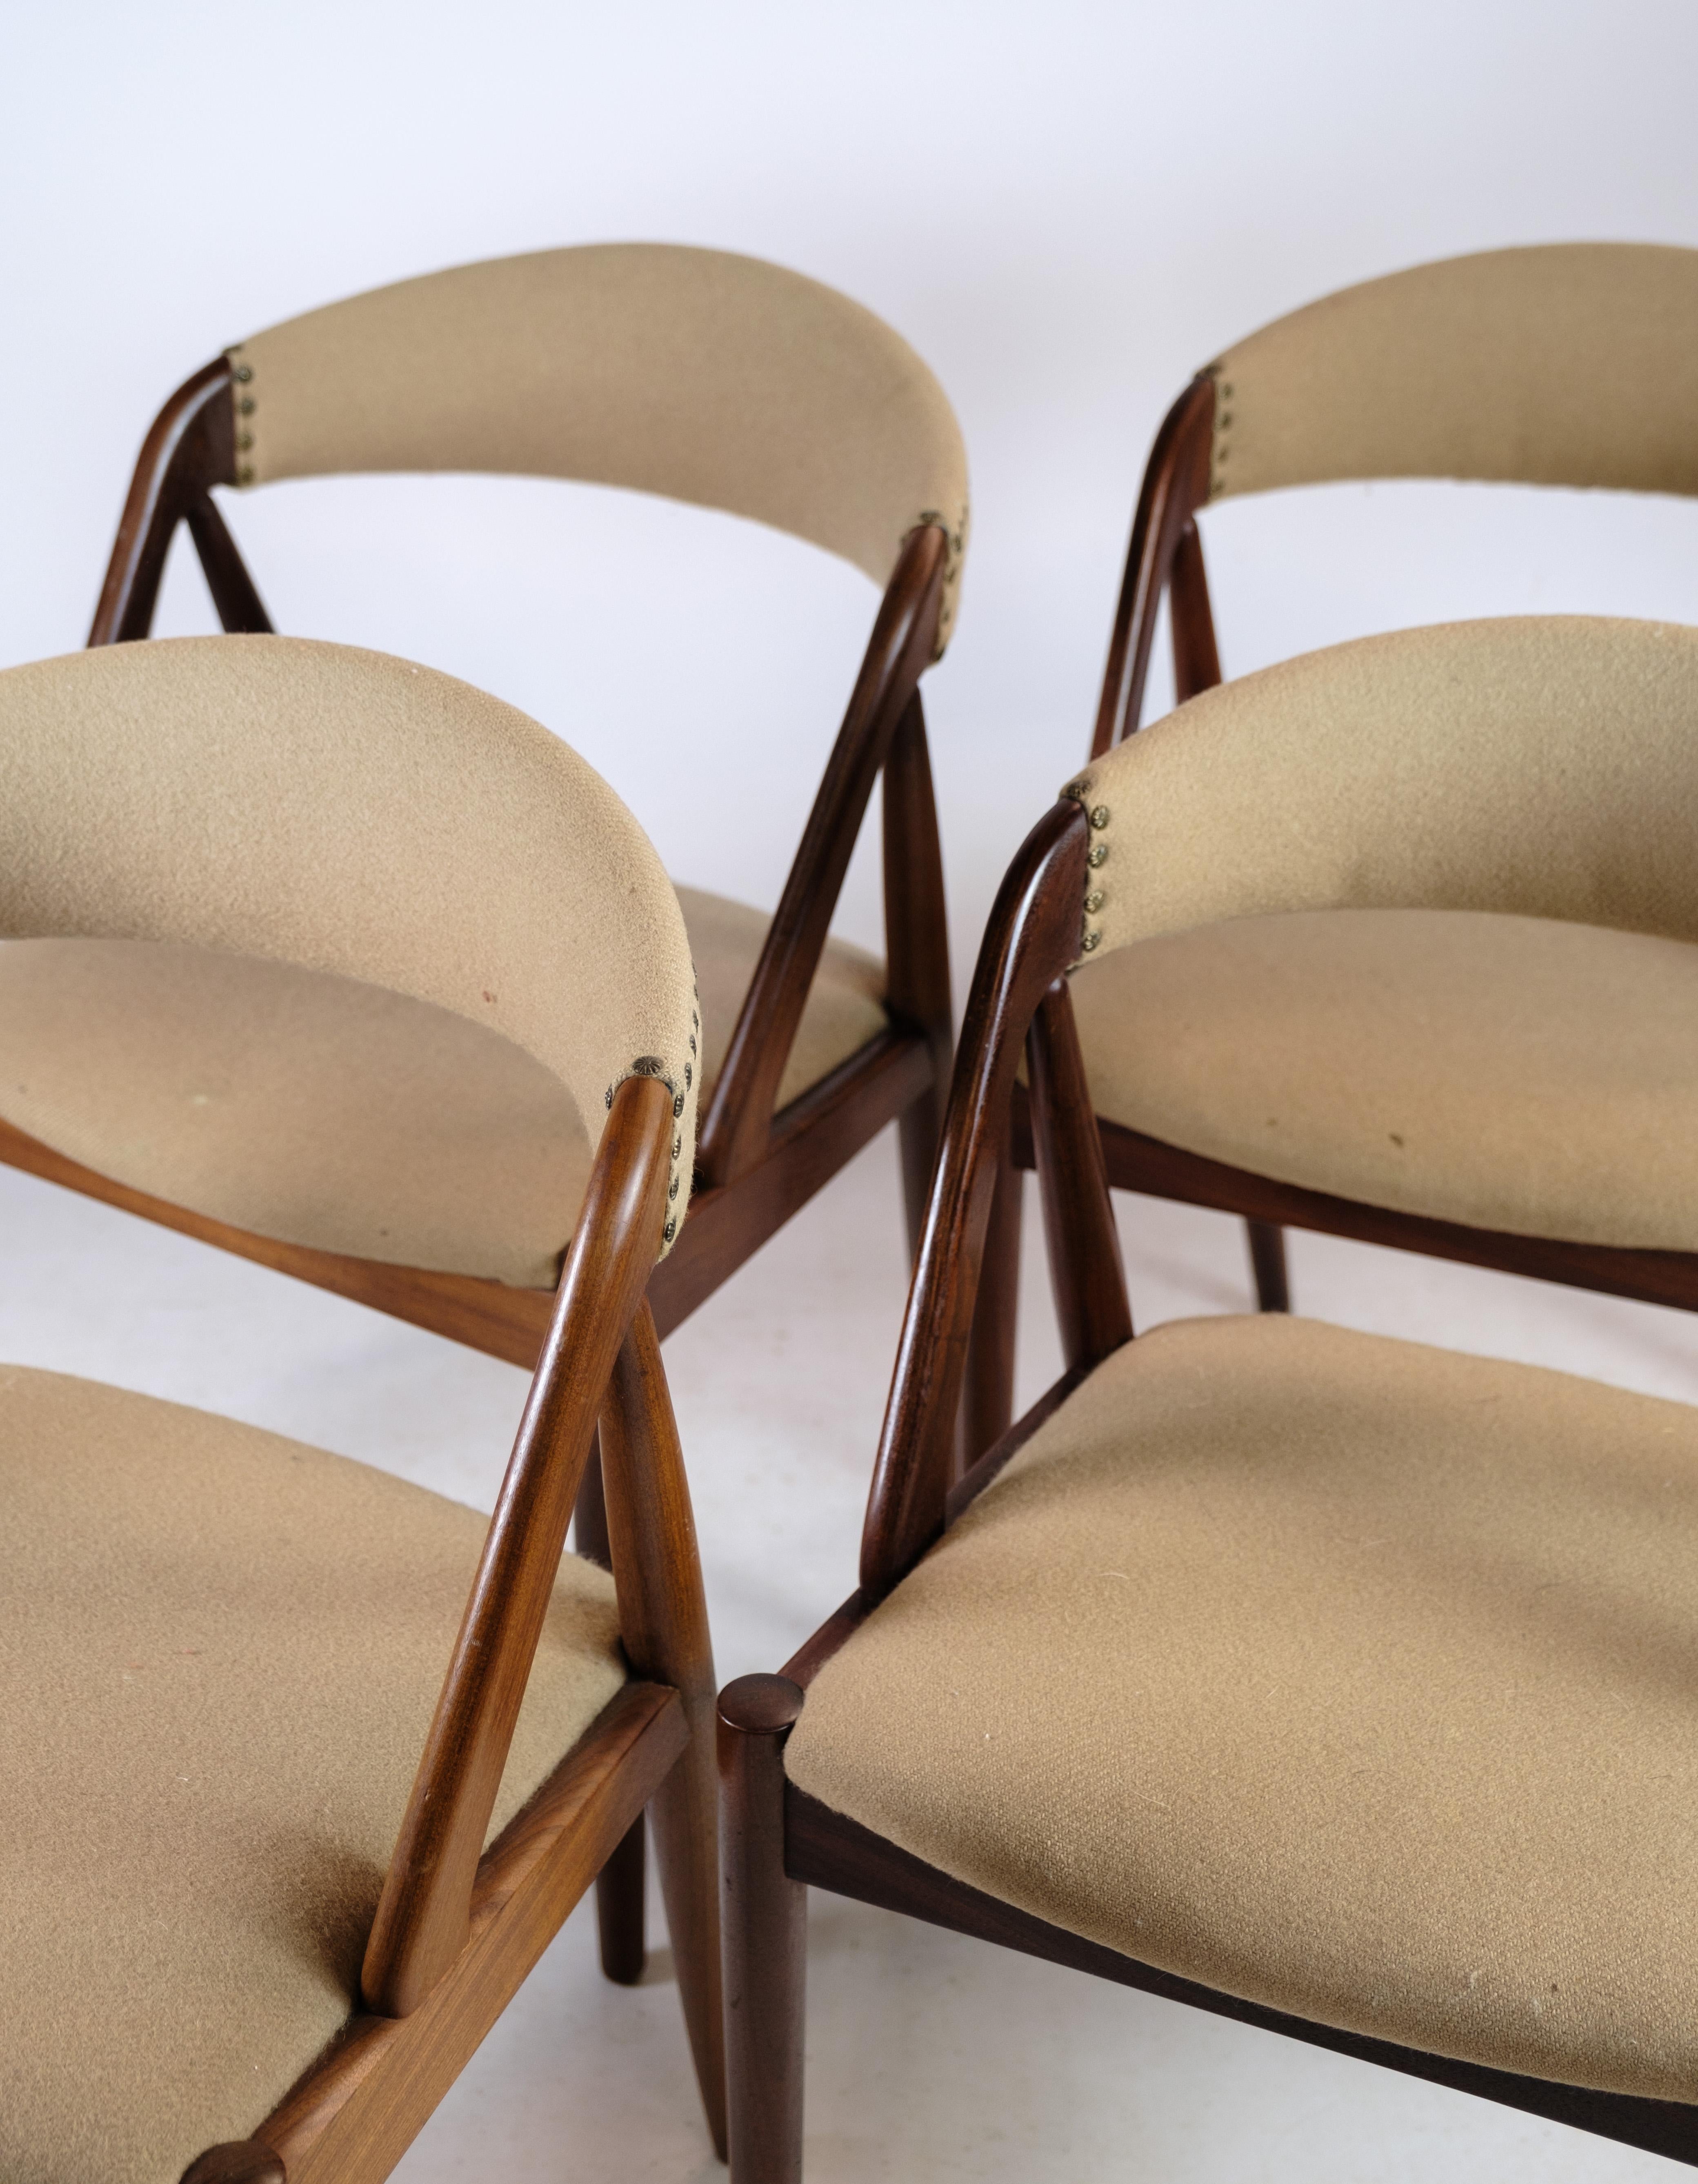 Mid-20th Century 4 Dining Room Chairs Model 31 Made In Teak, Designed By Kai Kristiansen For Sale